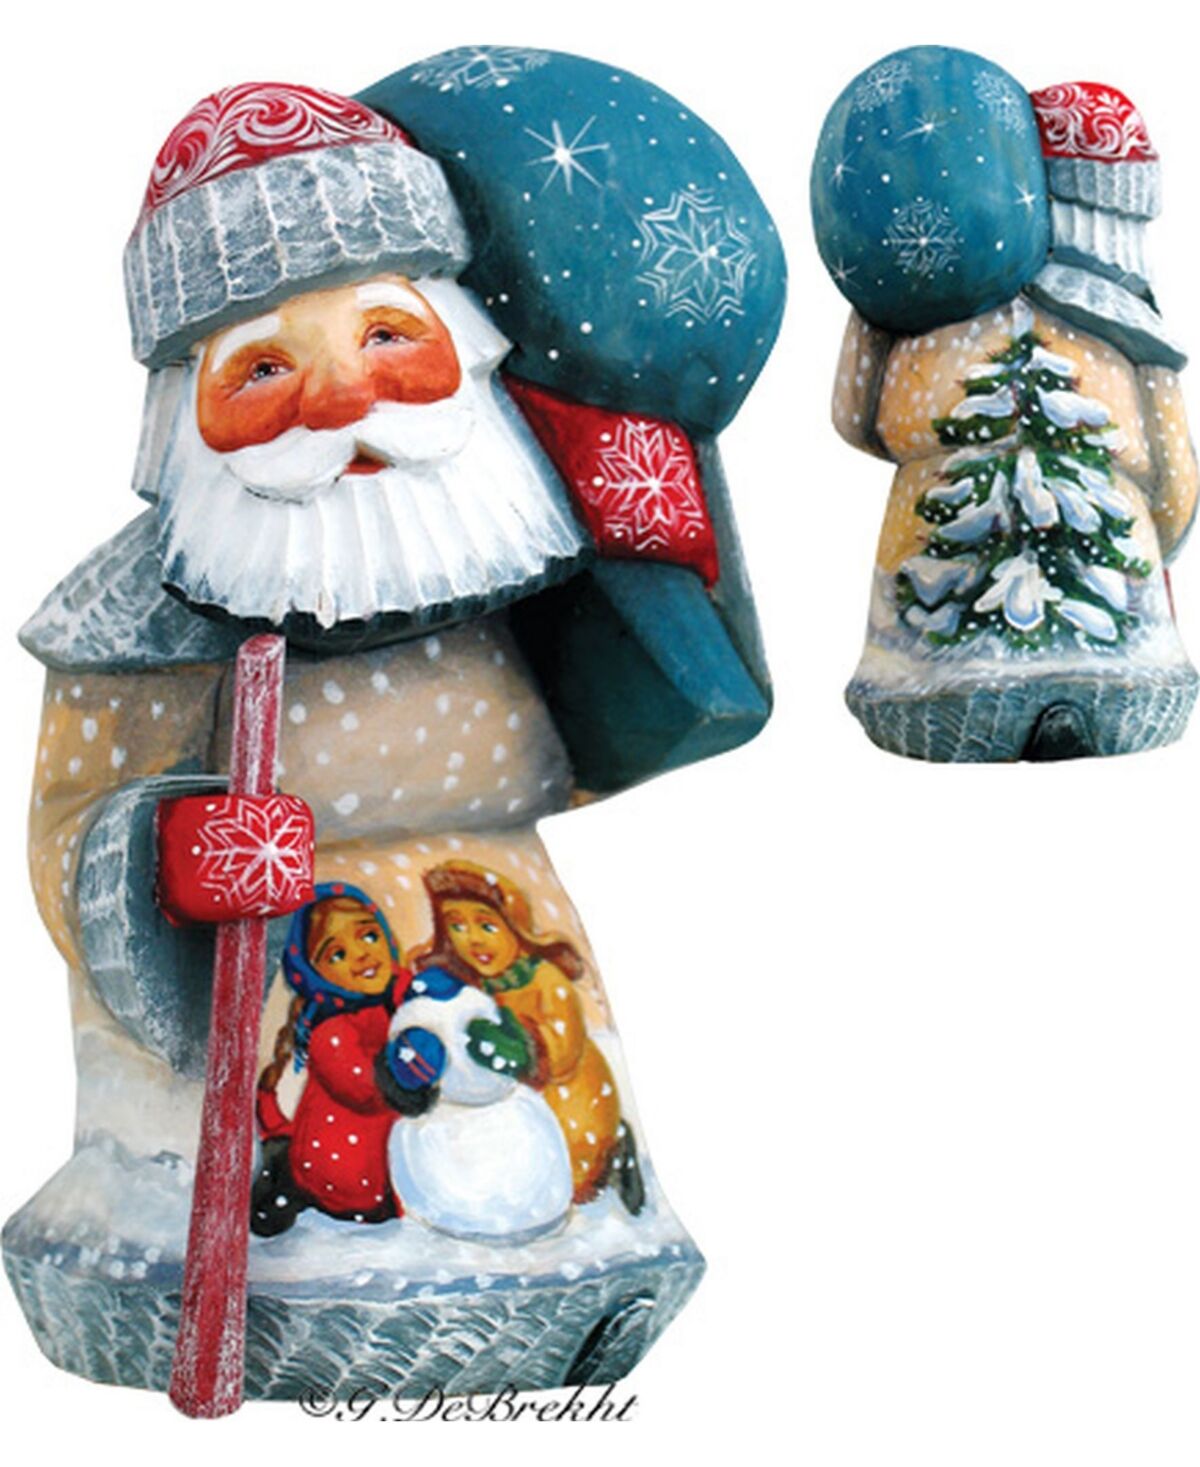 G.DeBrekht Woodcarved and Hand Painted Playing Snowman Santa Figurine - Multi